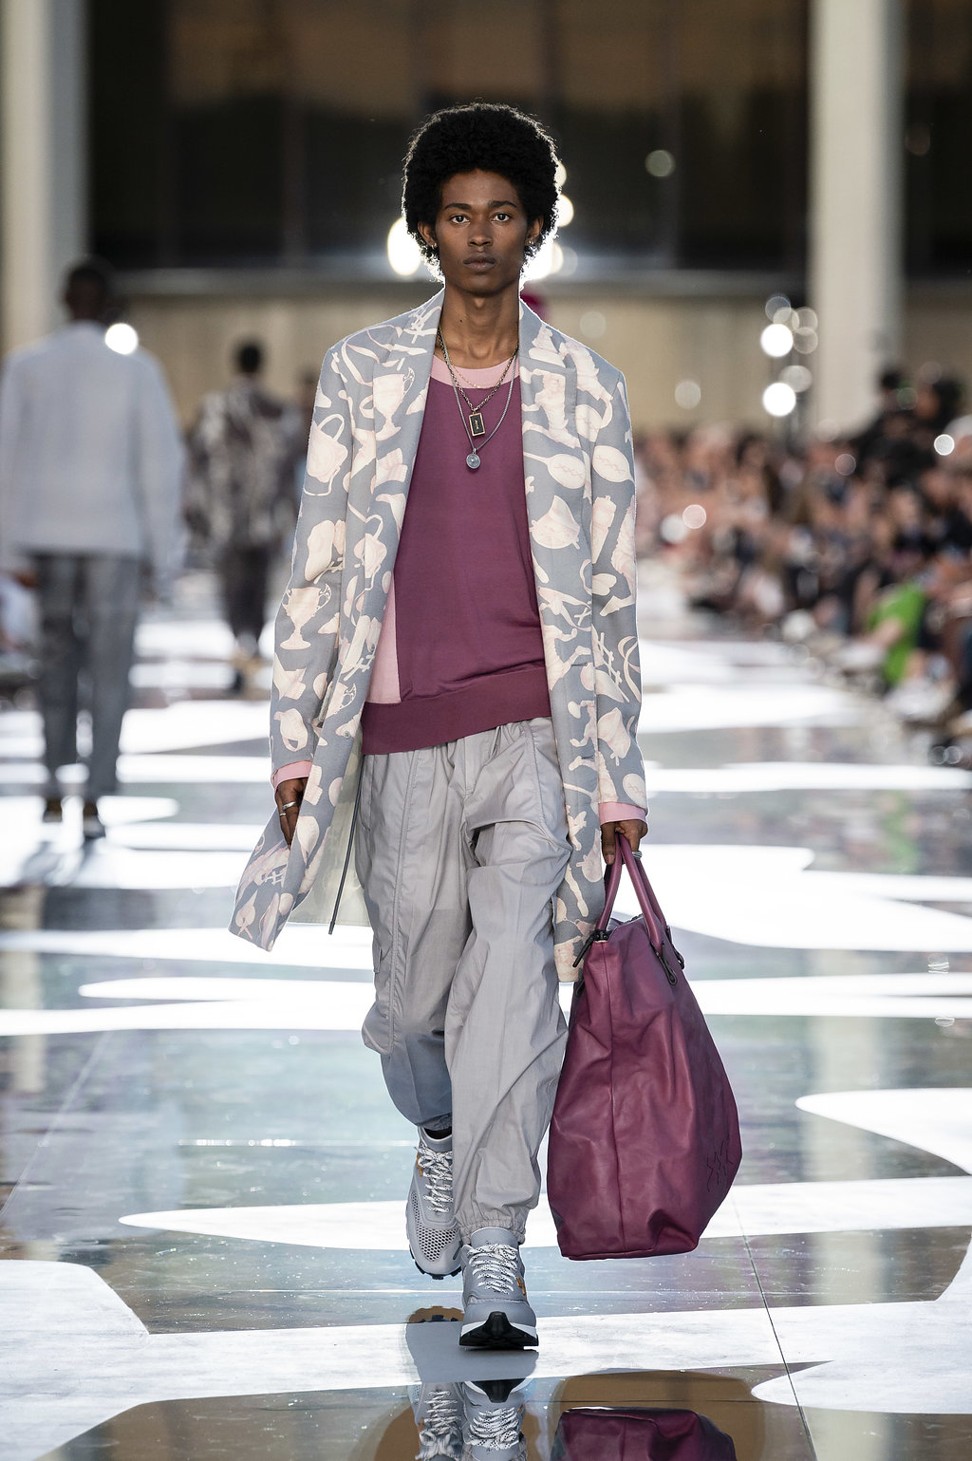 Zegna’s spring summer 2019 collection